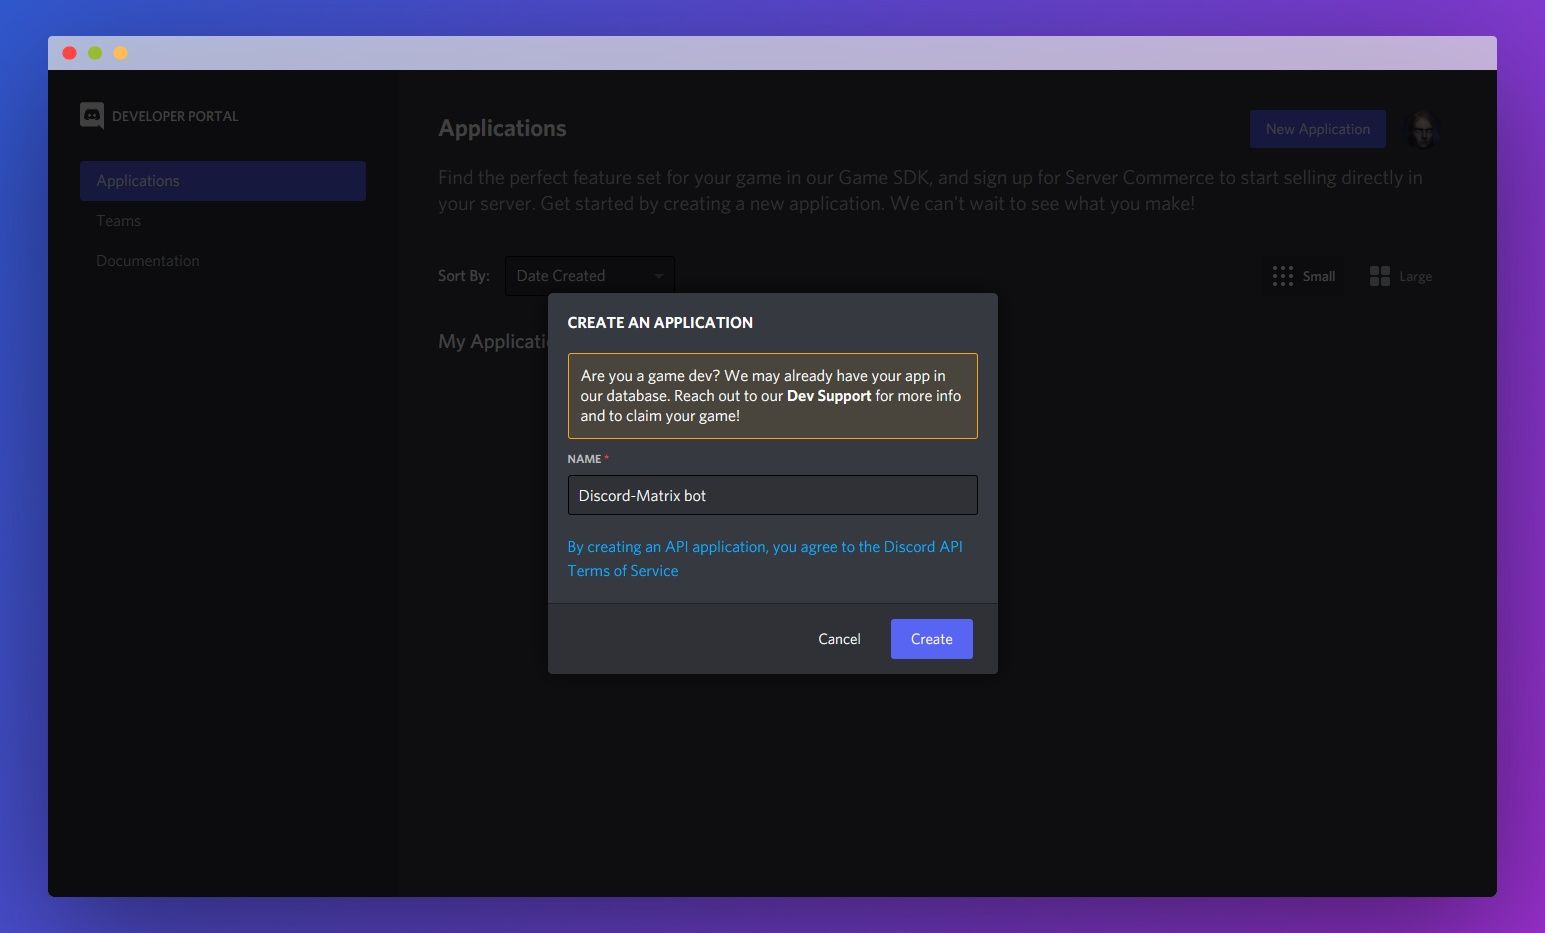 The create an application window, with a field named "discord-matrix bot" and a create button below